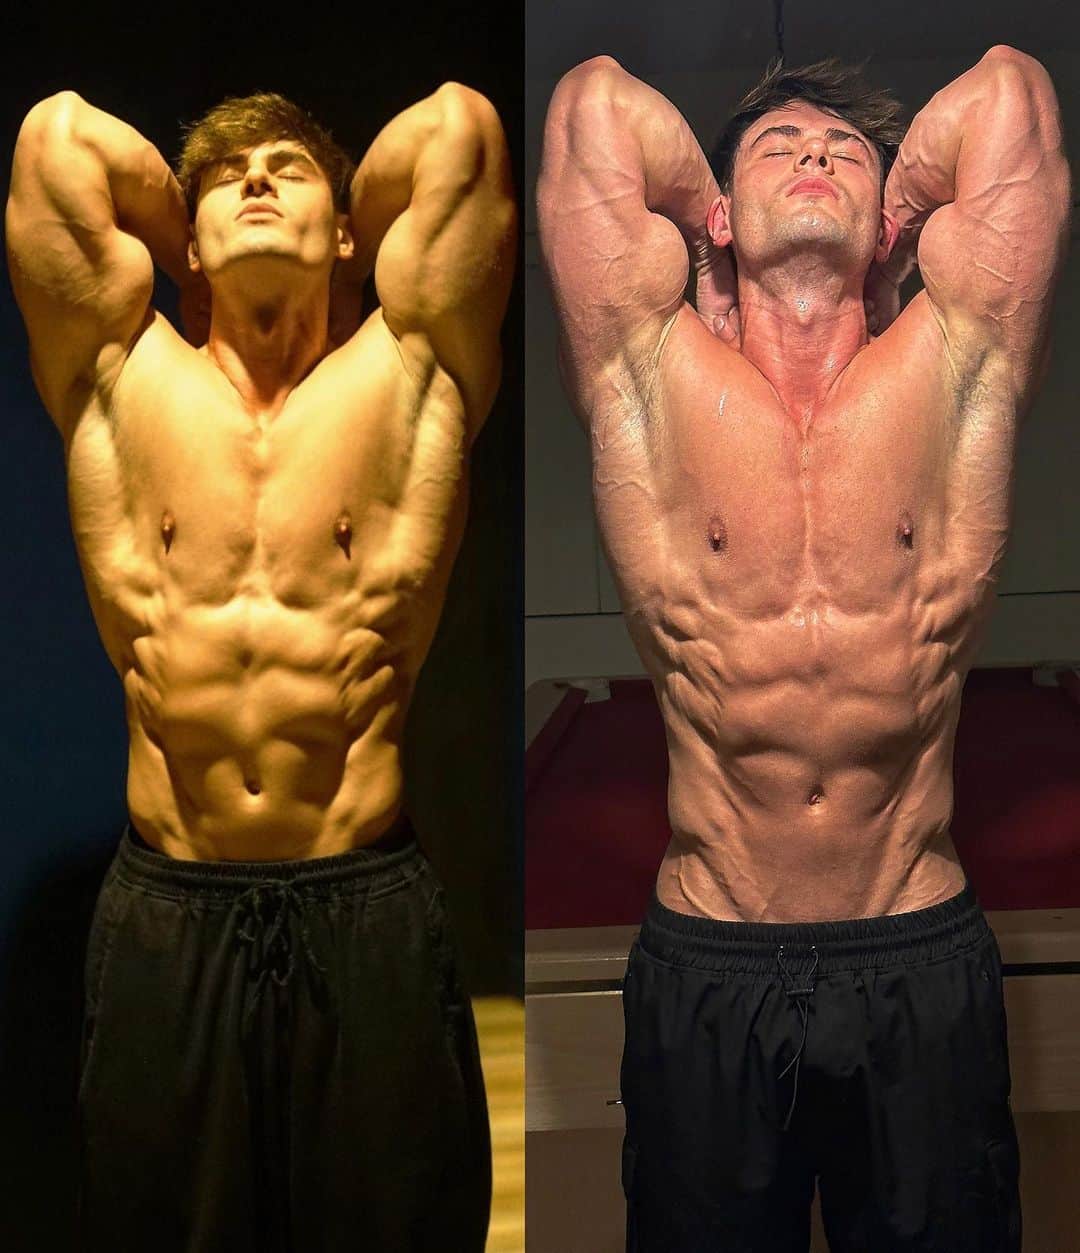 Jeff Seidのインスタグラム：「TWO WEEK NATURAL SHRED  Posted the pic on the left 2 weeks ago talking about how I was going to shred down using a high carb diet. Picture on the right is today after a 30 minute 194f/90c sauna session.  During those 2 weeks I was doing high volume training 5x a week, fasted cardio and HIIT twice a week. No cutting agents, no steroids, no fat burners etc were involved in this shred. Just good old fashion hard work and knowledge.   Lost some muscle along the way but it’s to be expected when trying to shred quickly as a natty. The before and after pics speak for themself.」